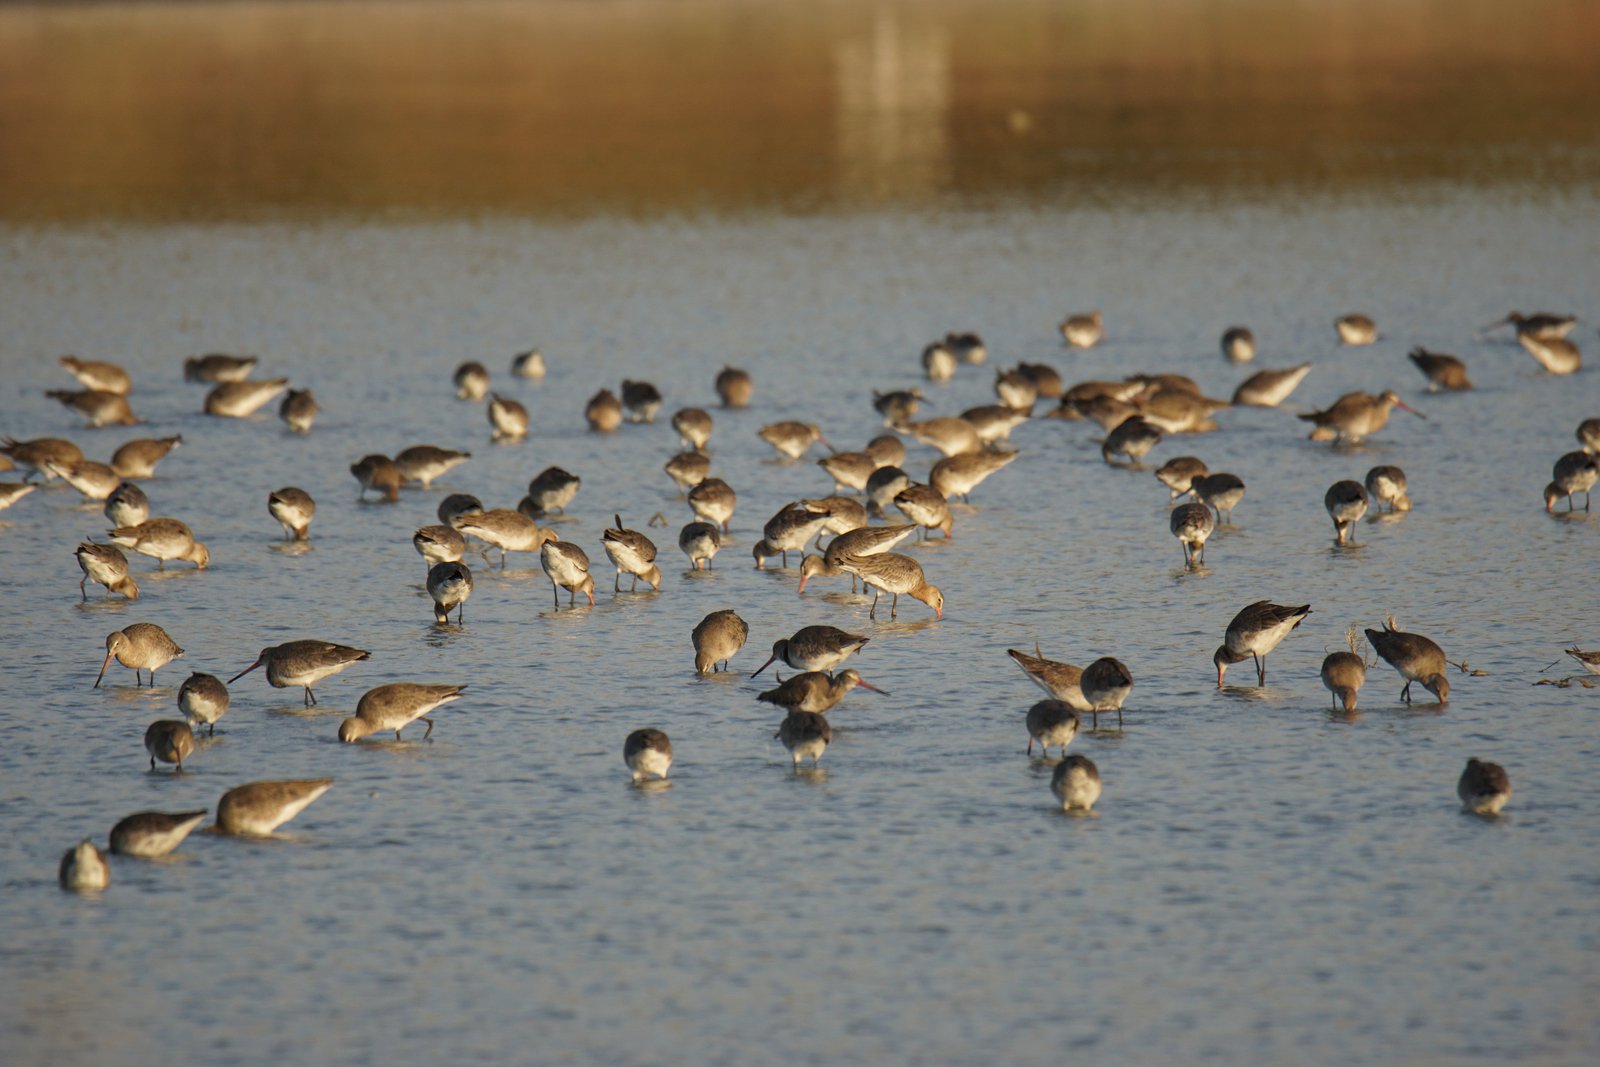 A large group of Black-tailed Godwits standing in shallow water in the Guembeul Natural Reserve in Senegal. Photo: C. Marlow/NLWKN